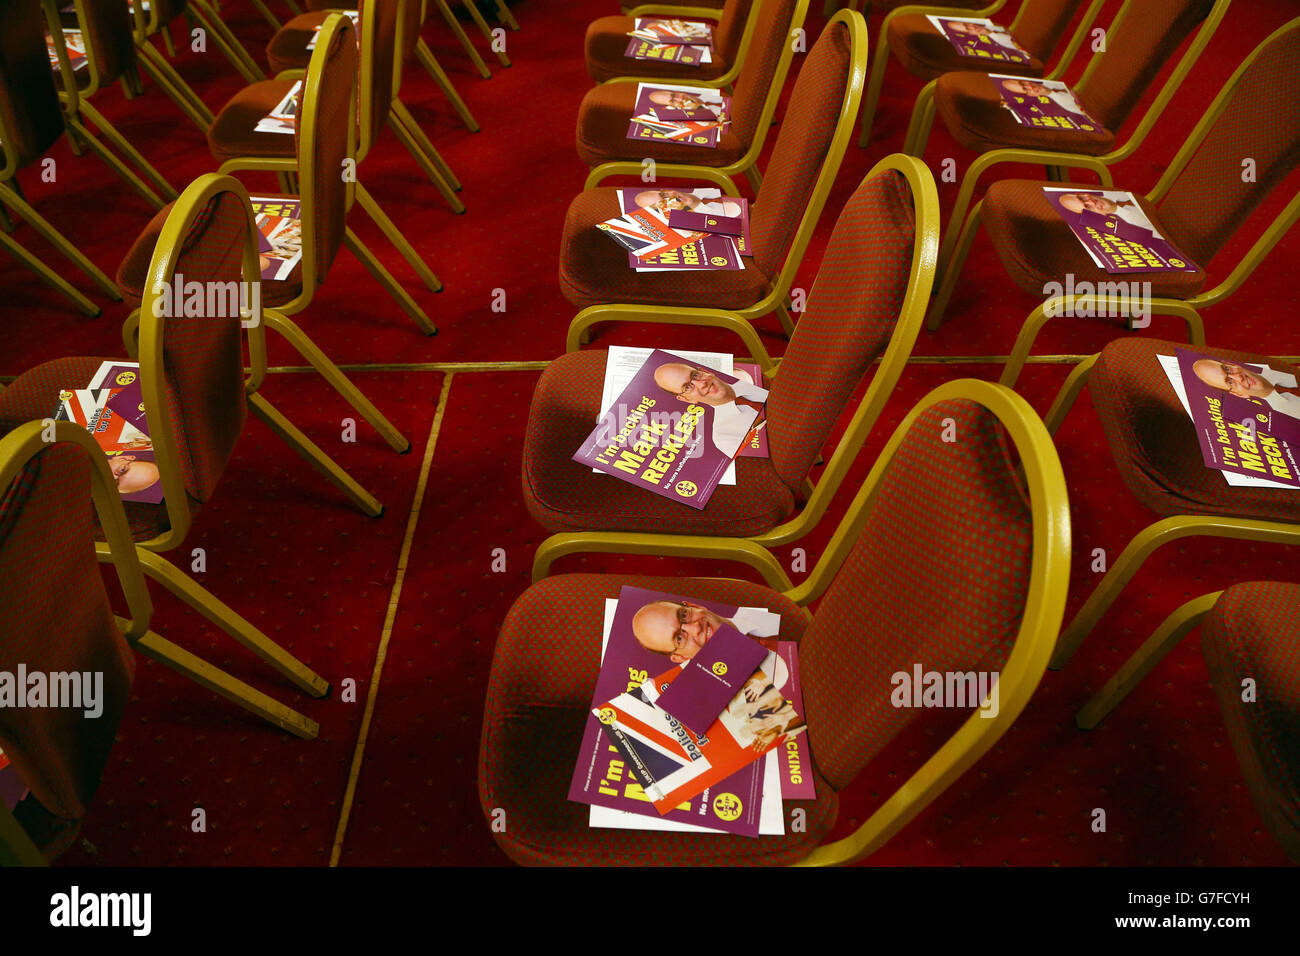 UKIP literature placed on seats before a party public meeting at the Guildhall in Rochester, Kent, ahead of the forthcoming Rochester and Strood by-election next week. Stock Photo